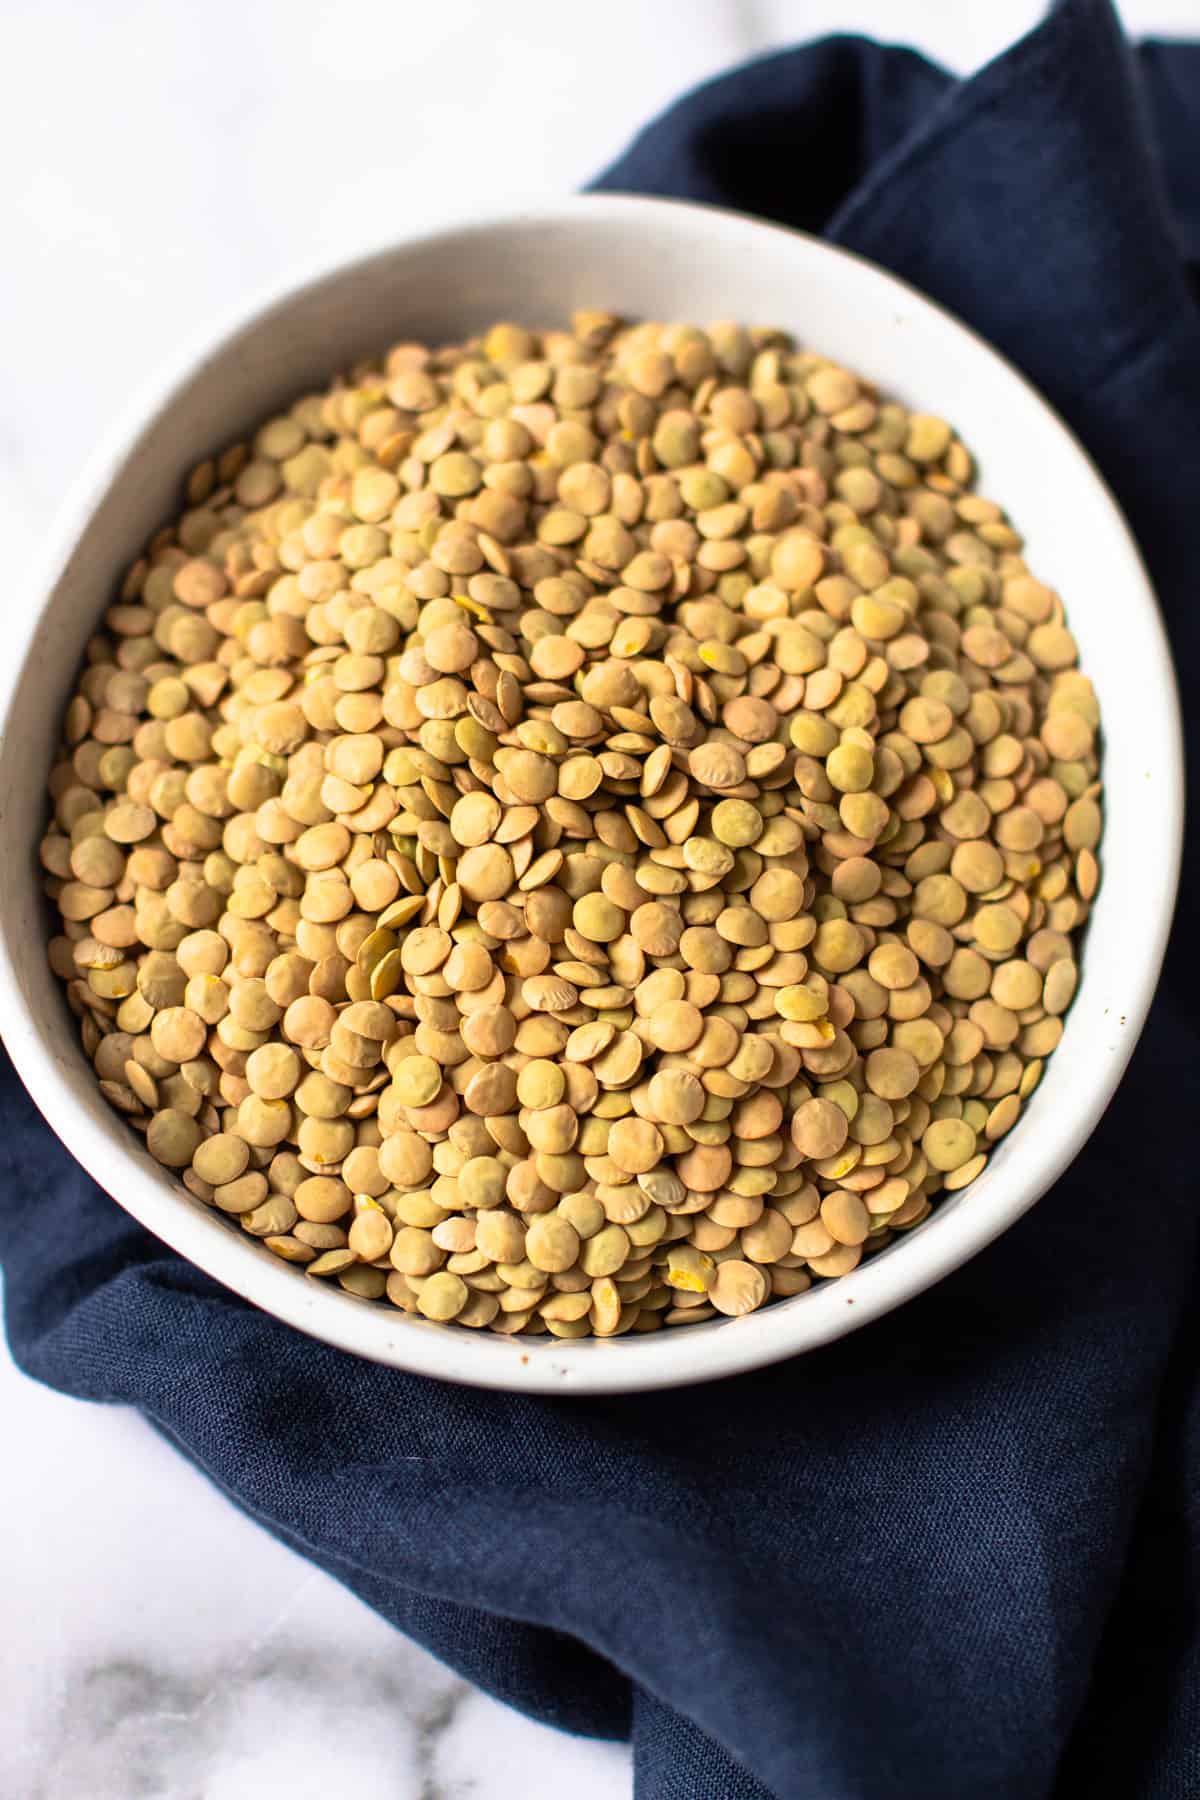 Uncooked lentils in a bowl.